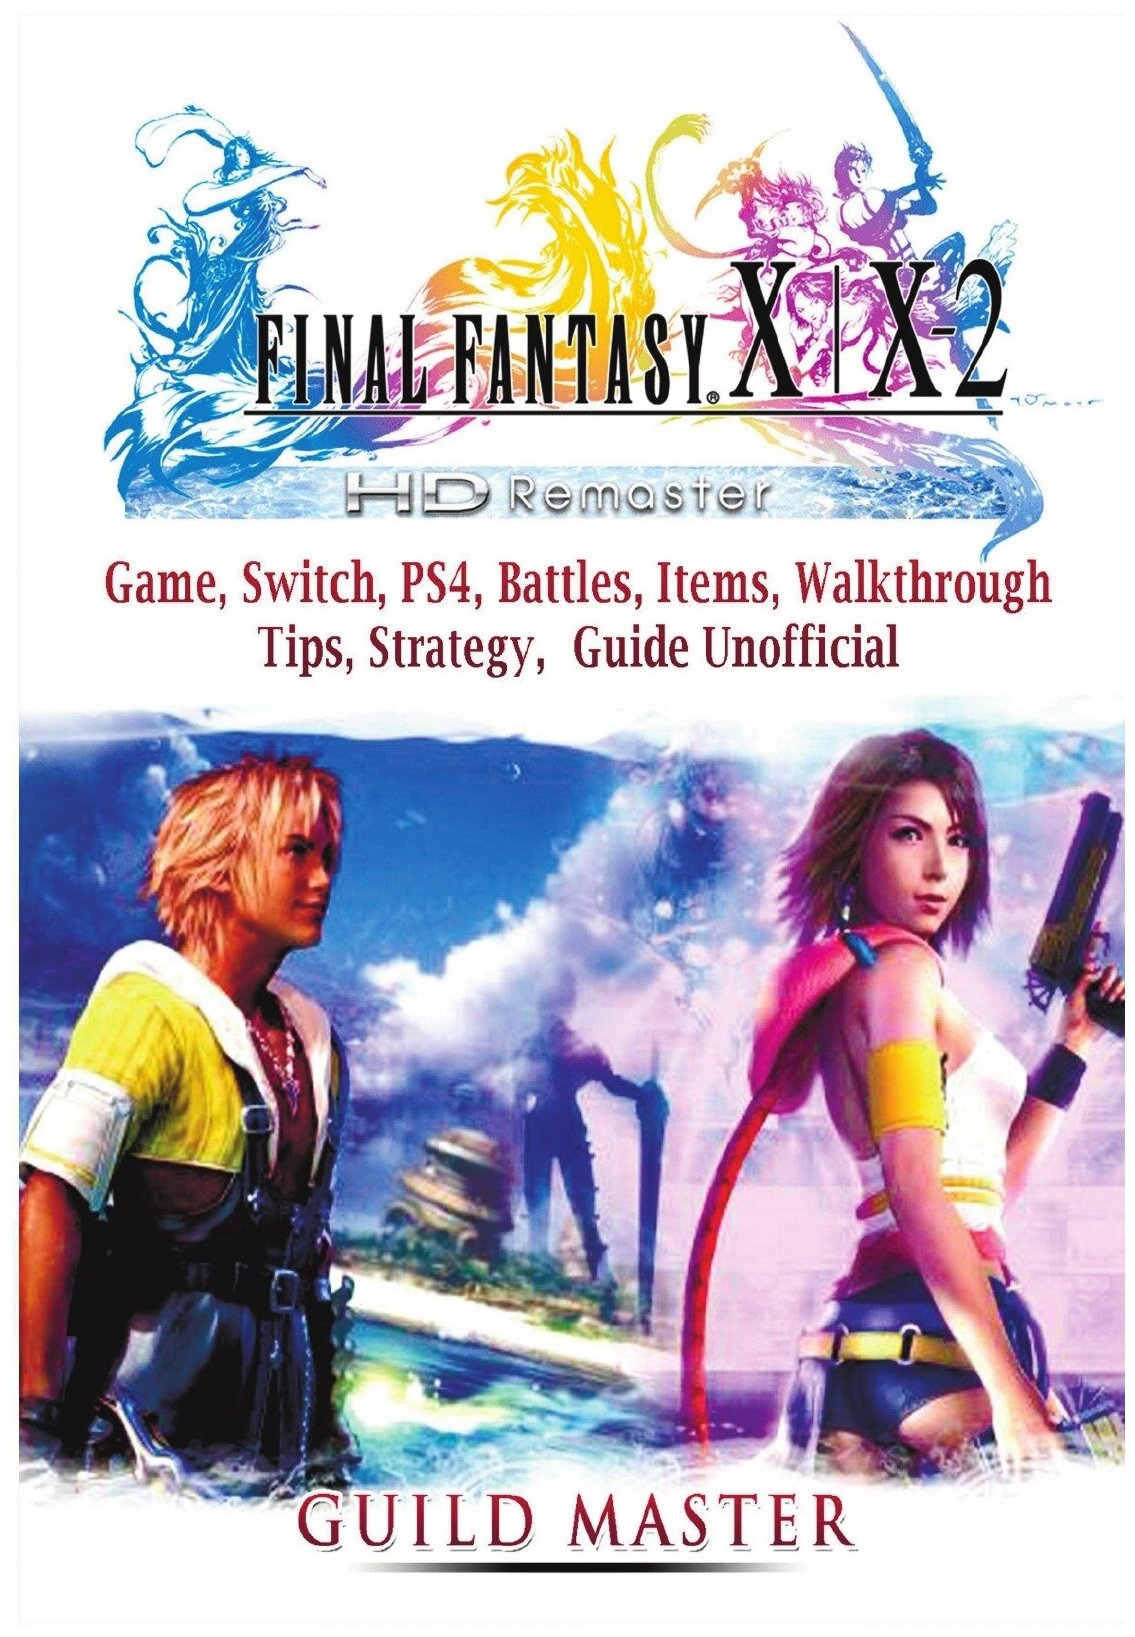 Final Fantasy X & X2 HD Remastered Game, Switch, PS4, Battles, Items, Walkthrough, Tips, Strategy Guide Unofficial